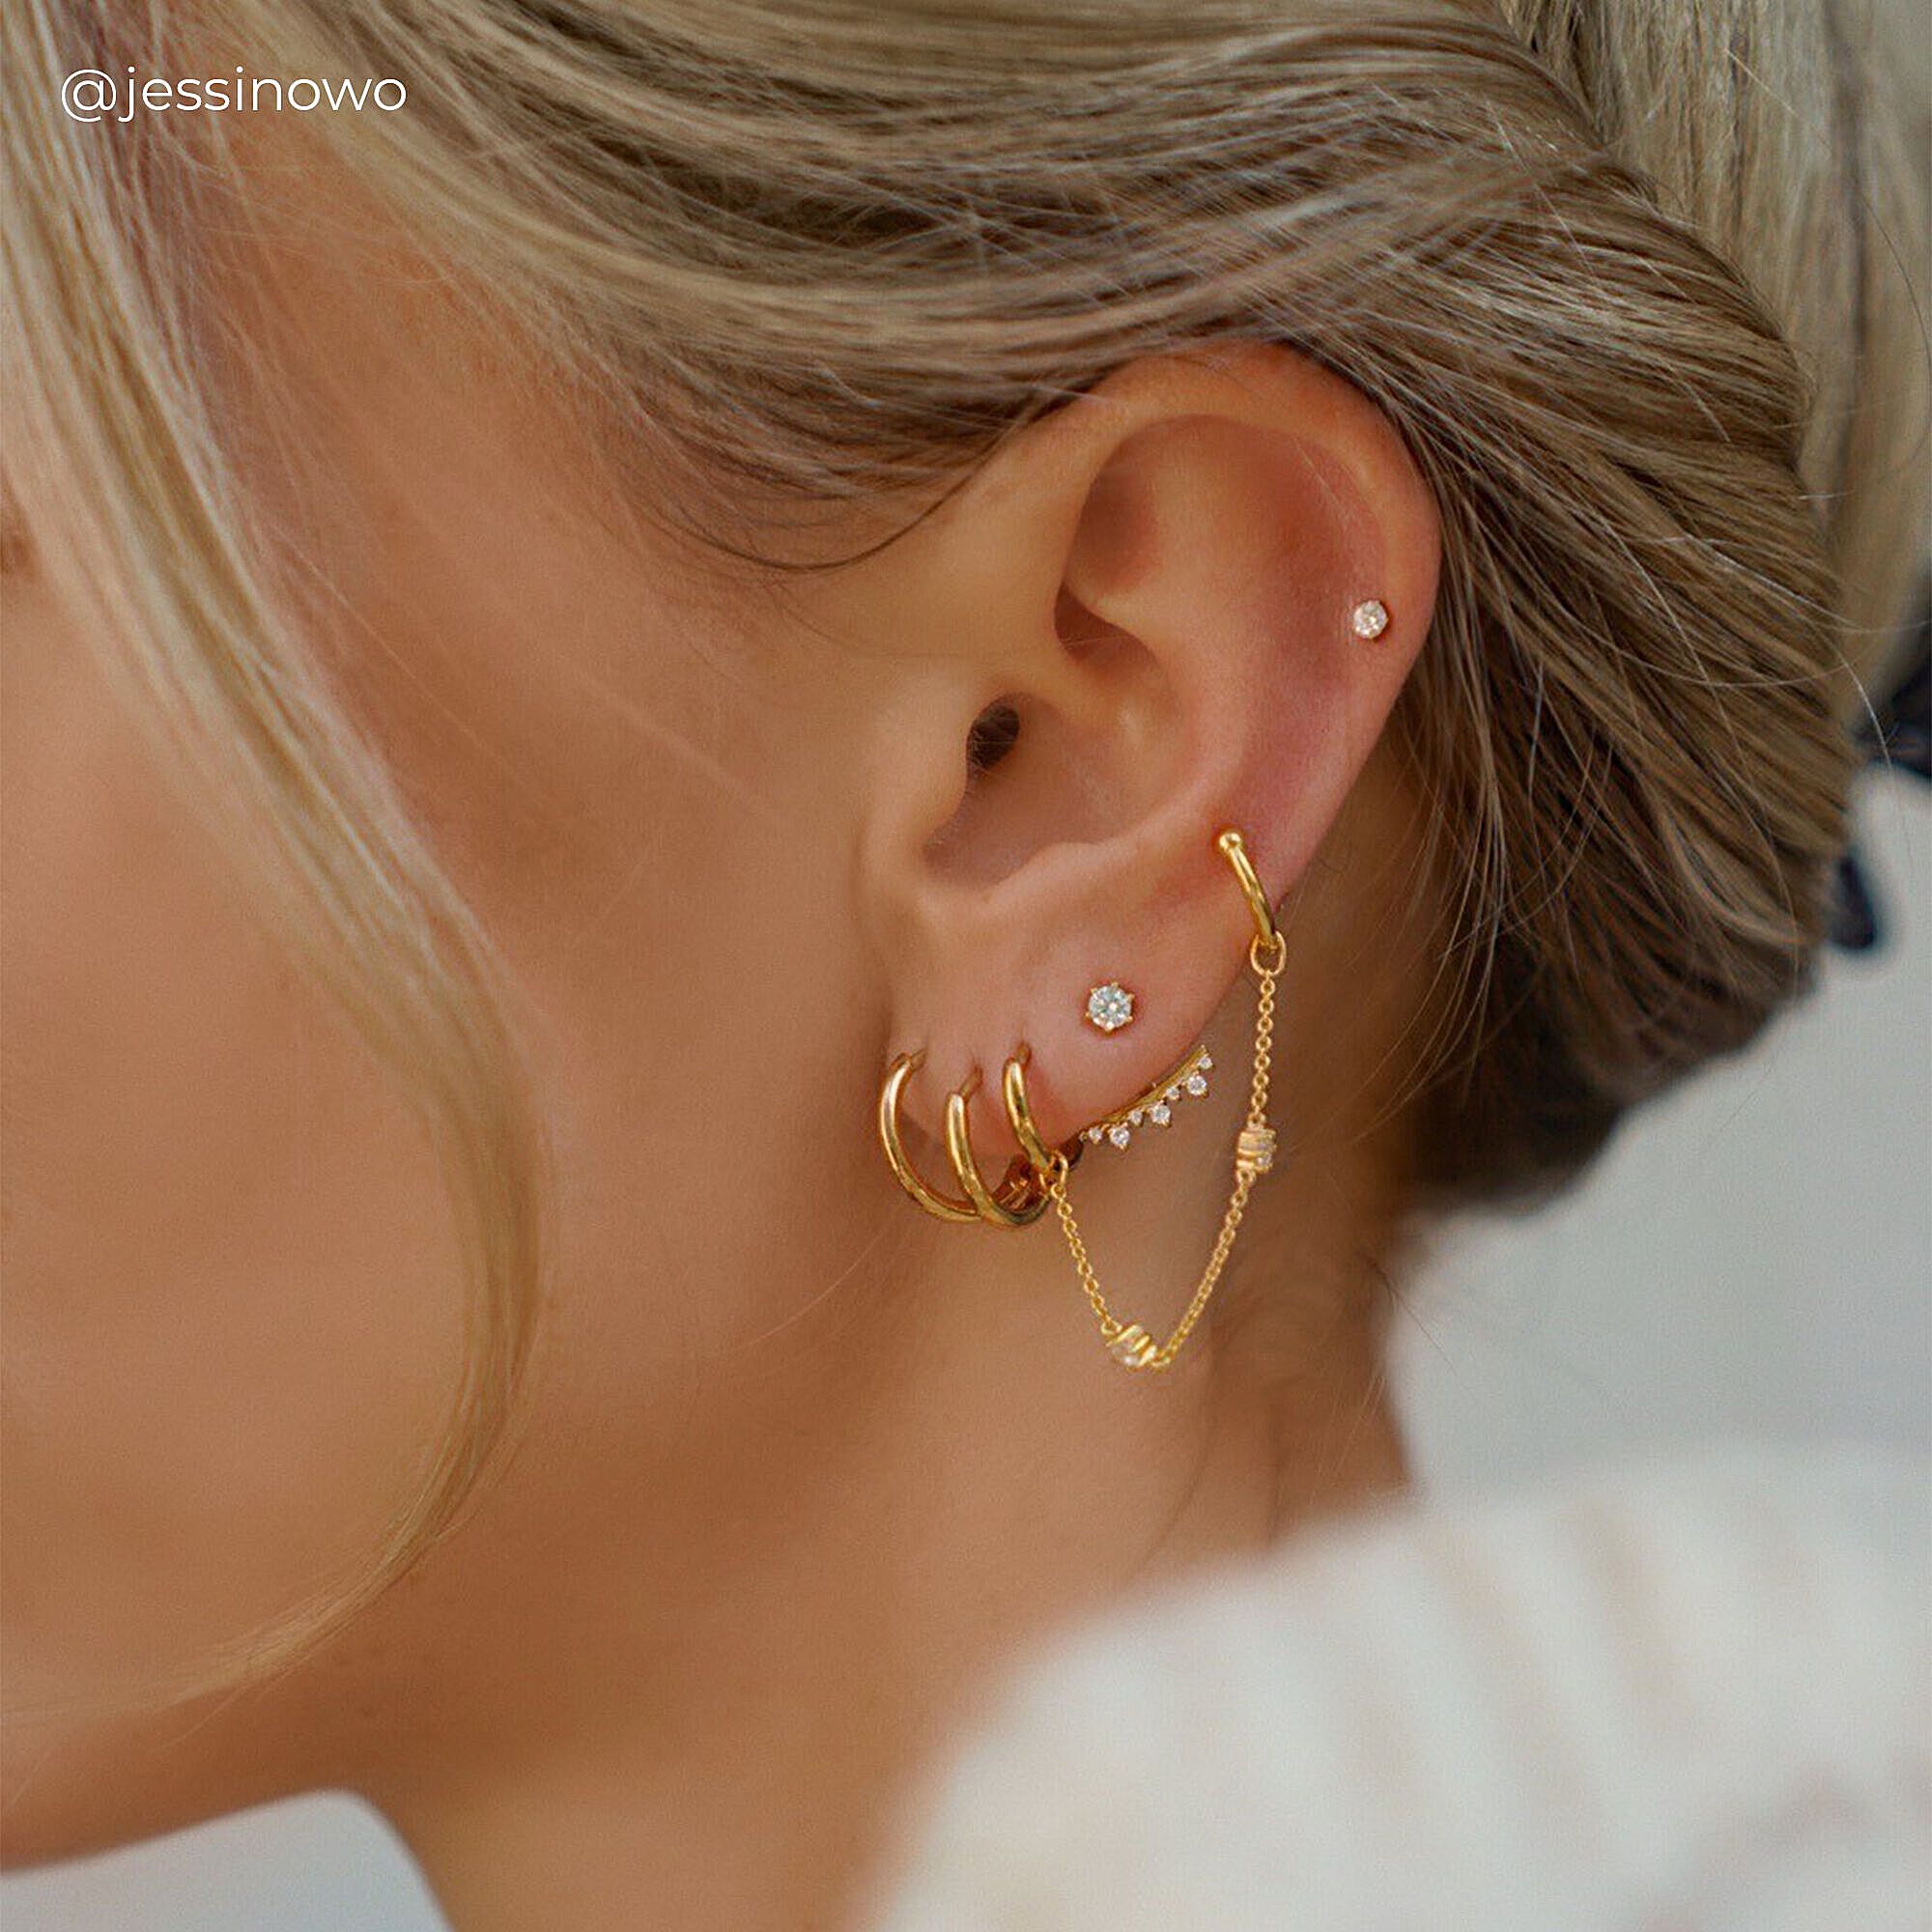 Ear stud in centrepiece │ with SABO gold THOMAS zirconia